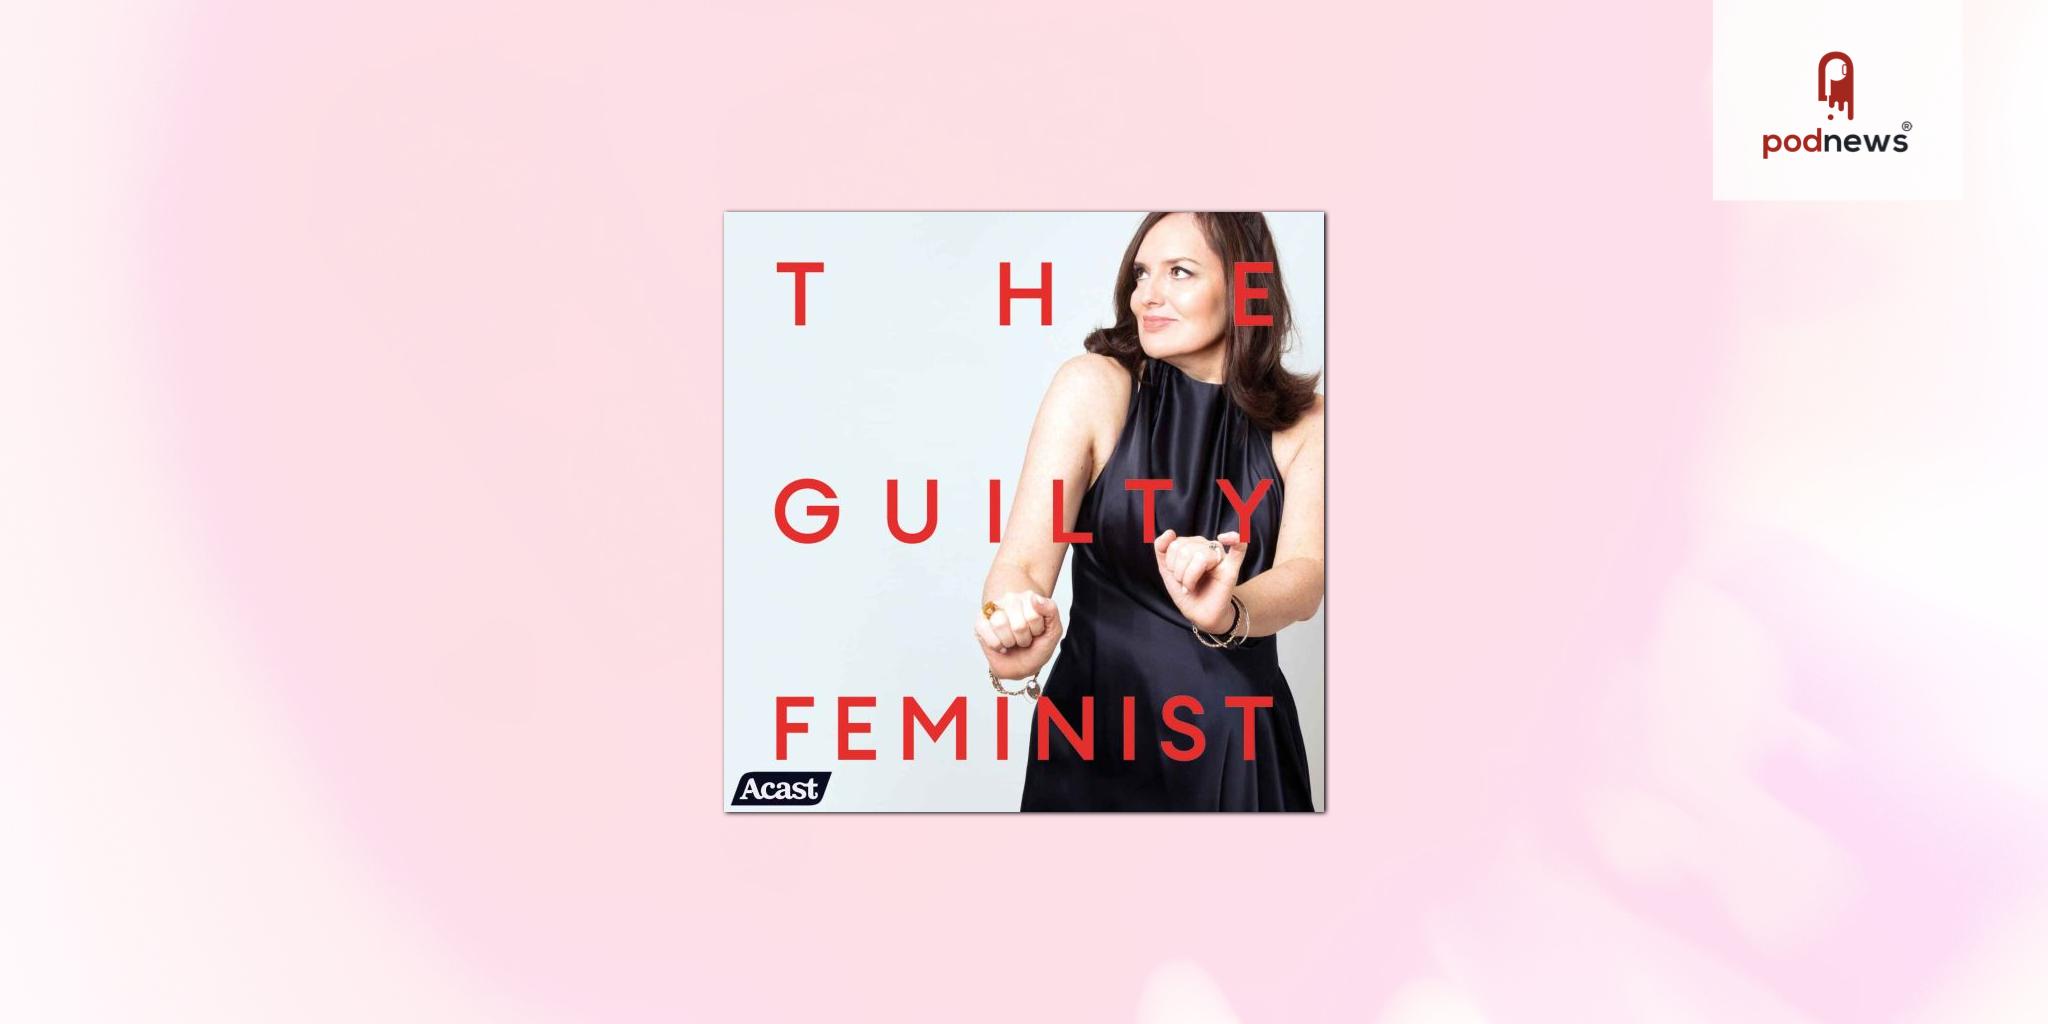 The Guilty Feminist joins the Acast Creator Network